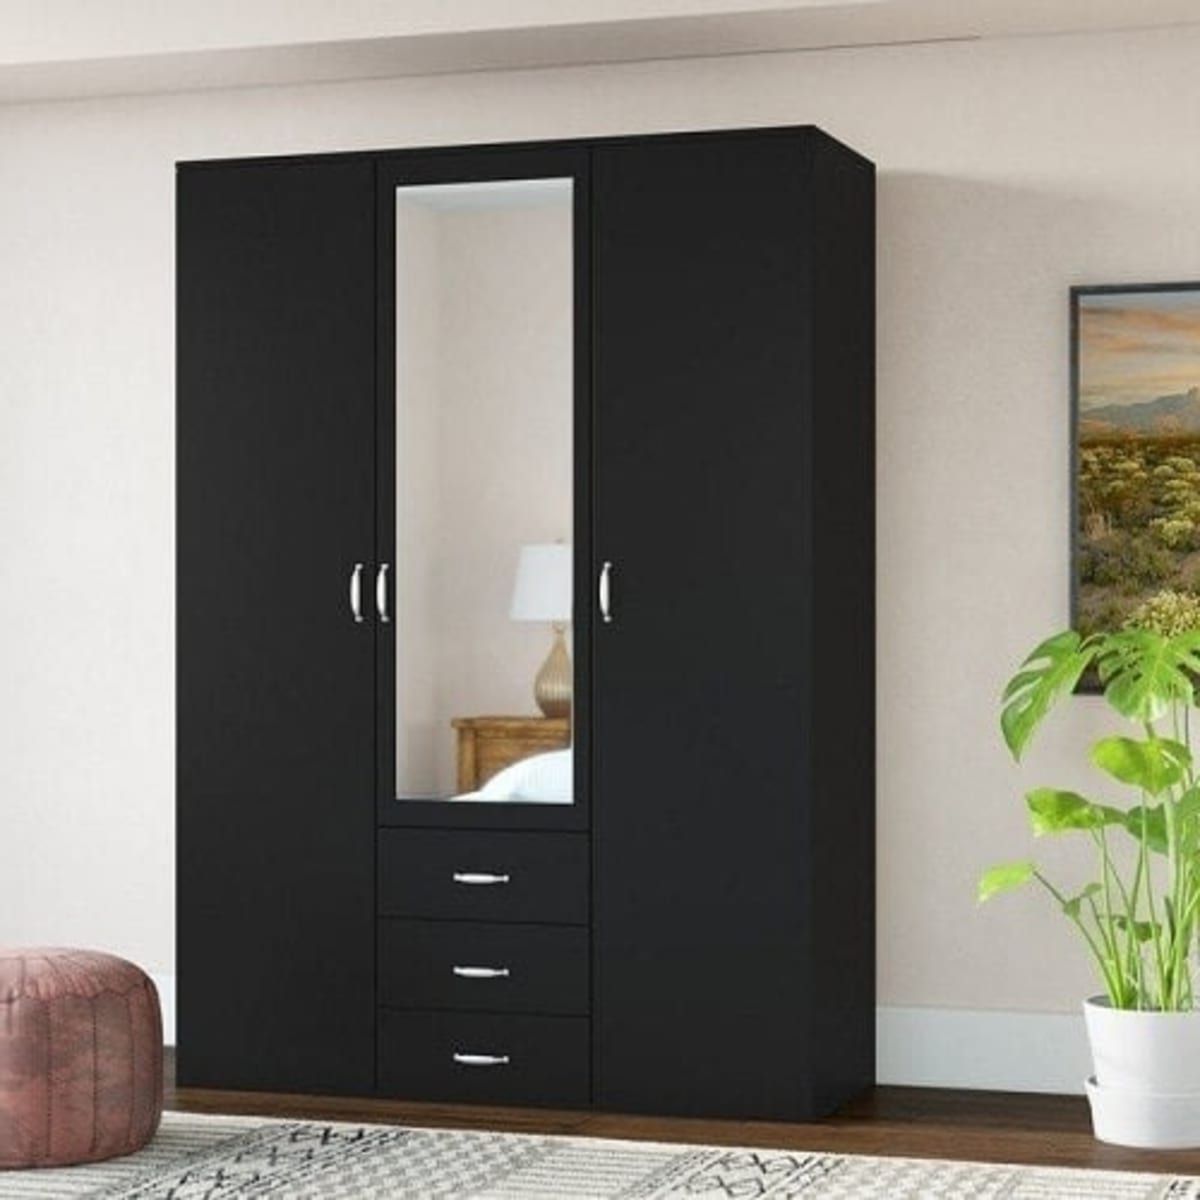 Beyond 3 Door Wardrobe With 3 Drawer And Mirror Black | Konga Online  Shopping Within Three Door Wardrobes With Mirror (Gallery 4 of 20)